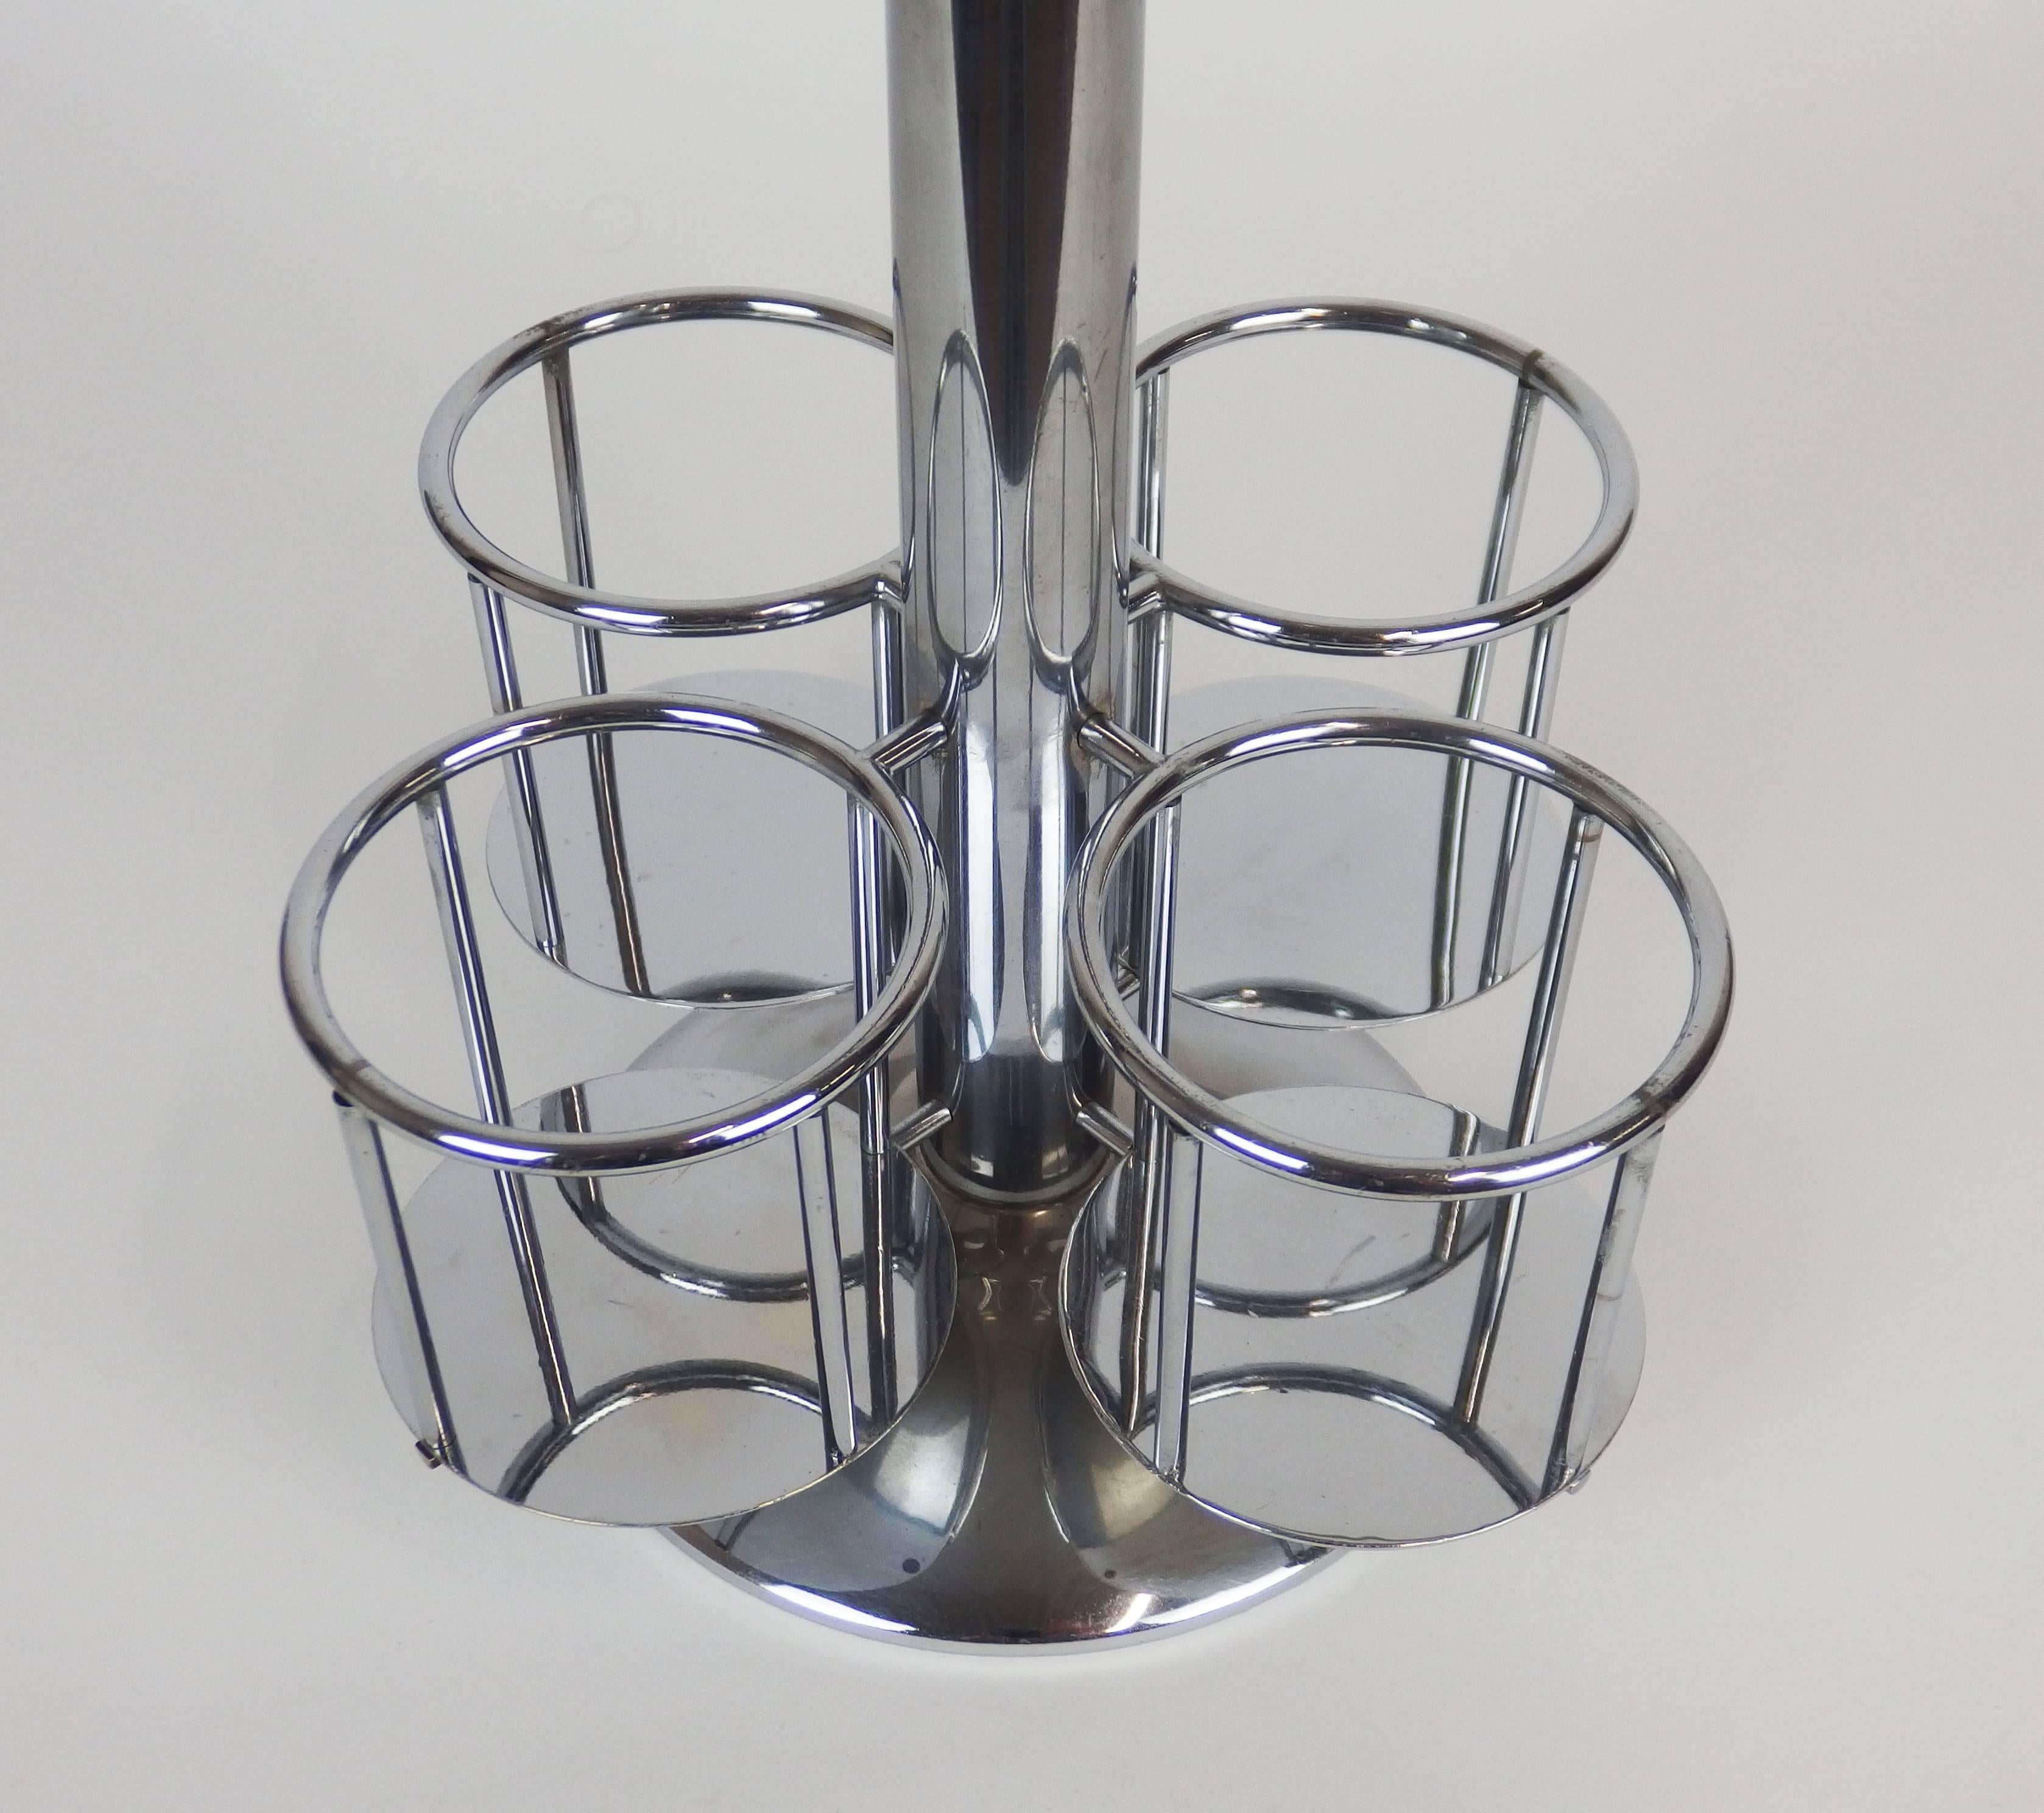 Mid-20th Century Art Deco Modernist Bottle Holder in the Style of Jacques Adnet For Sale